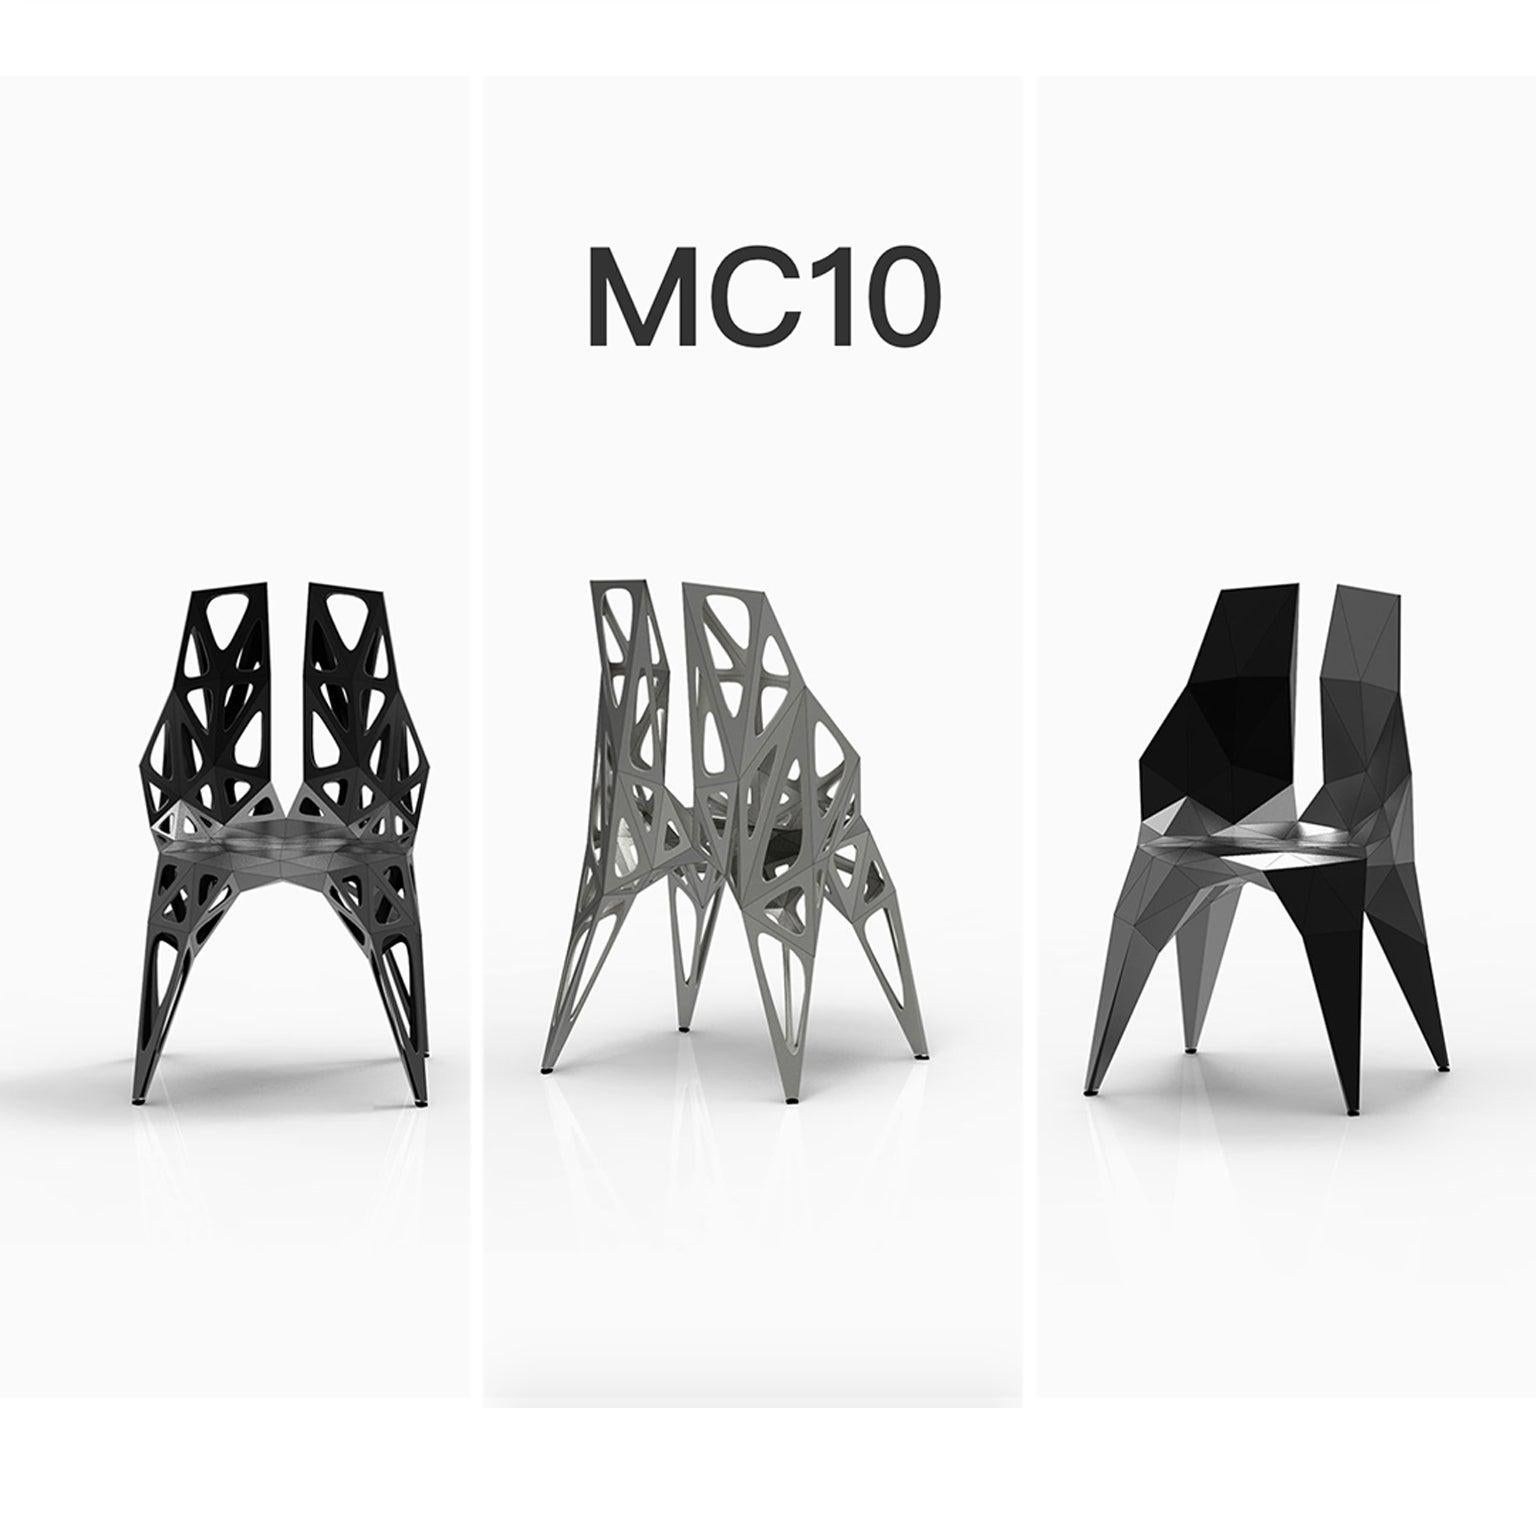 Outdoor and indoor
4 official types chairs / available
Solid
Dots
Frame
2 colors official / available / finish in polish/matte
Black
Silver

Furniture designer Zhoujie Zhang is known for the integration of automated digital design and